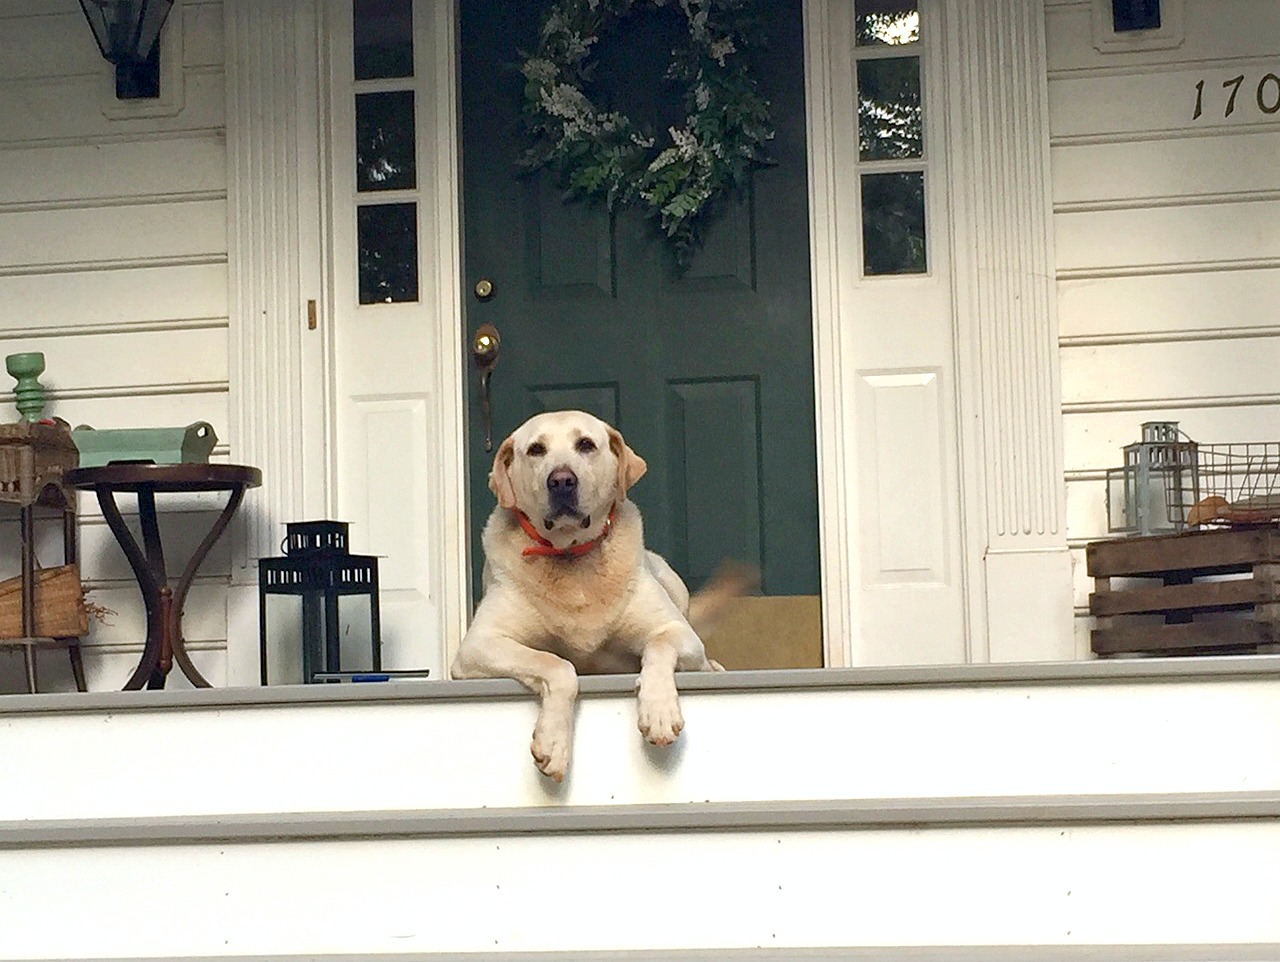 Porch loving with Yellow lab